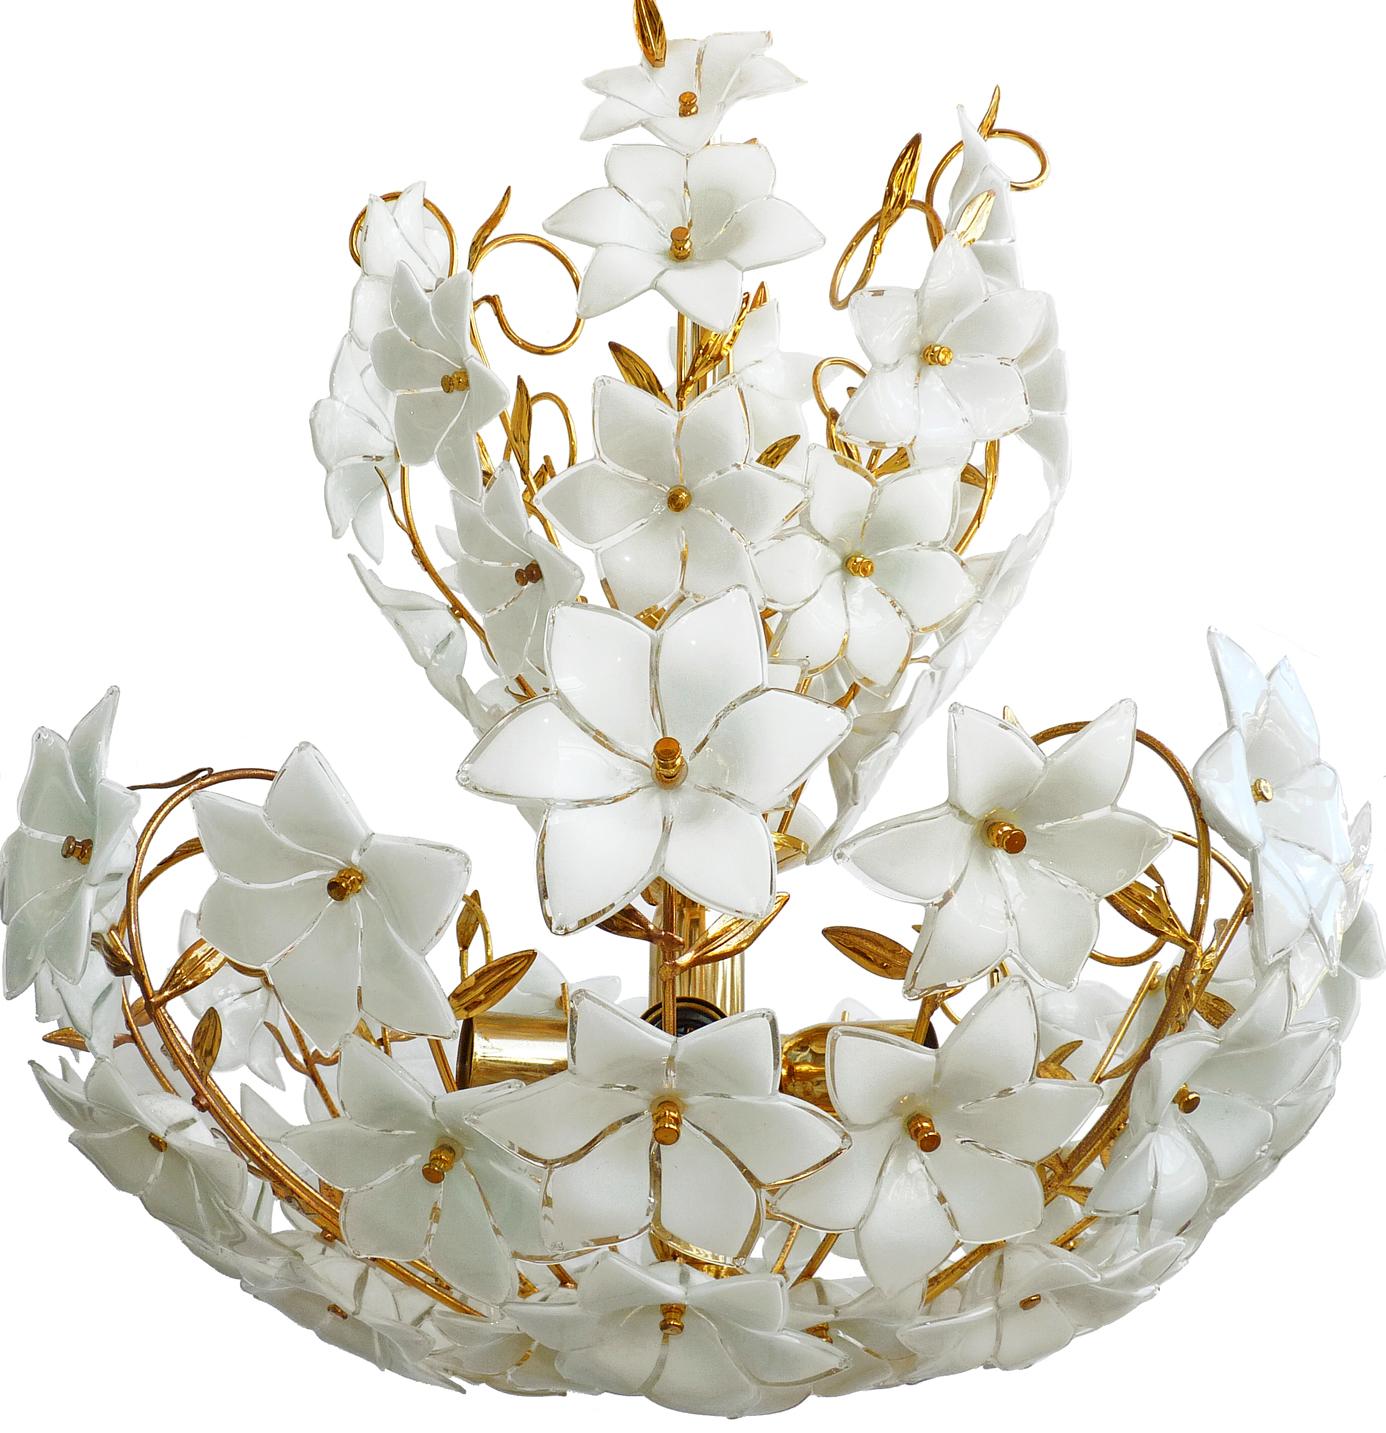 Large 1990s vintage midcentury Italian Murano flower bouquet attributed to Venini. Art glass with 72 hand blown white and clear glass flowers and gold-plated brass. A few missing leaves.
Measures:
Diameter 24 in/ 60 cm
Height 36 in (chain=3.5 in)/90